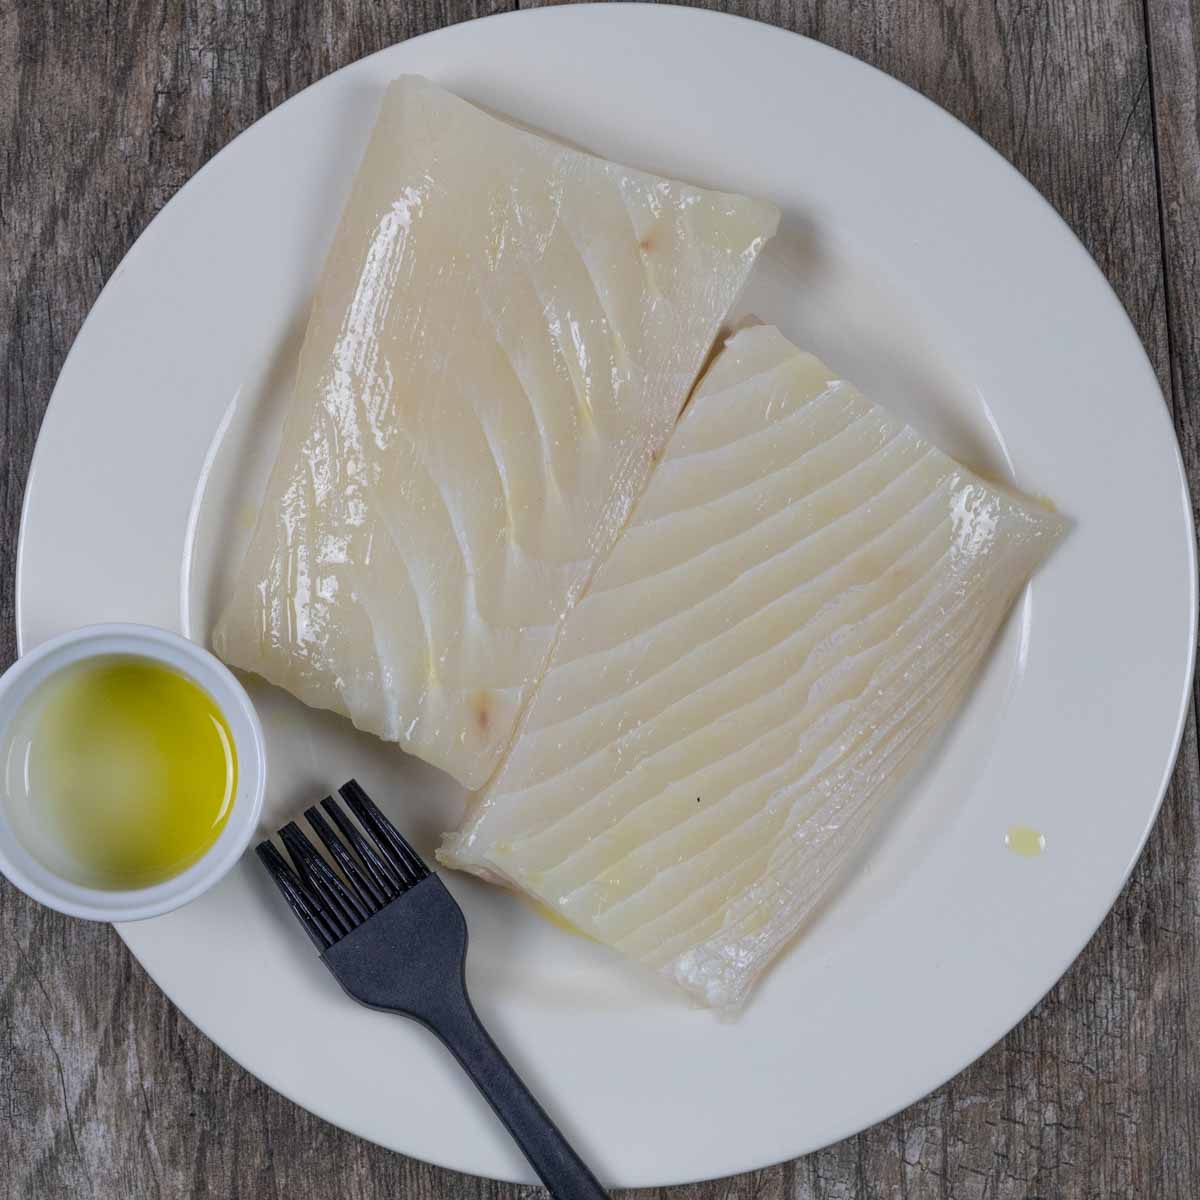 Two halibut filets on a white plate with a ramekin of oil and basting brush.